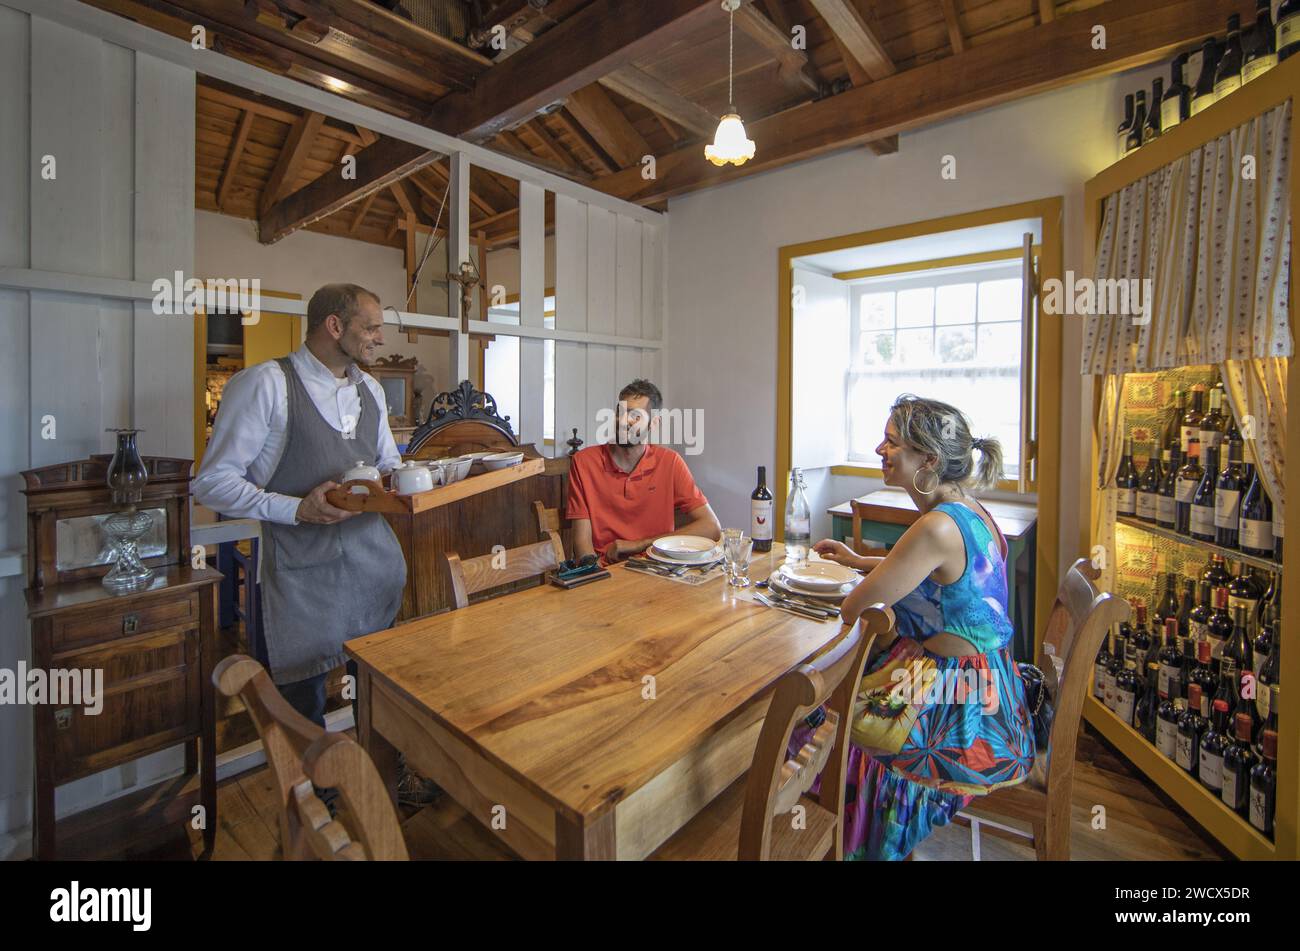 Portugal, Azores archipelago, Terceira island, couple seated in the rustic decor of the restaurant of the quinta do martelo, an old farm transformed into a rural ecotourism complex Stock Photo